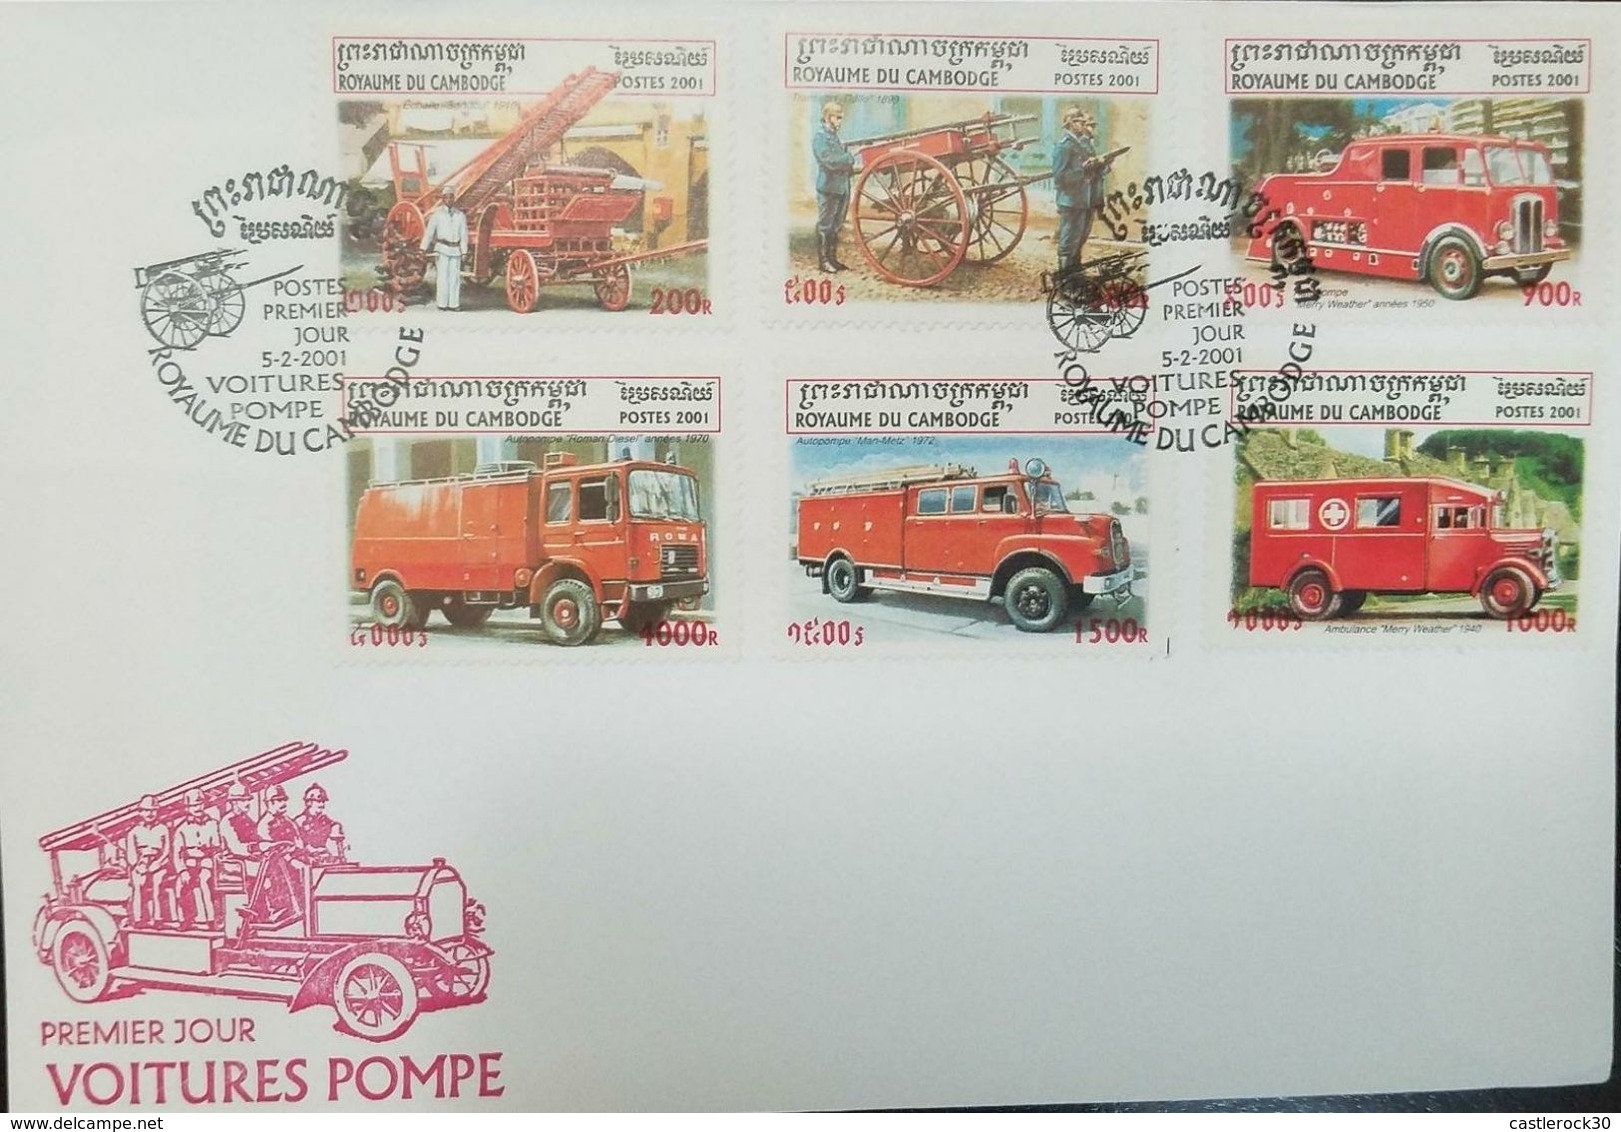 L) 2001 CAMBODIA, FIRE TRUCK, CAR COLLECTION, OLD CARS, MULTIPLE  STAMPS, RED, FDC - Cambodia